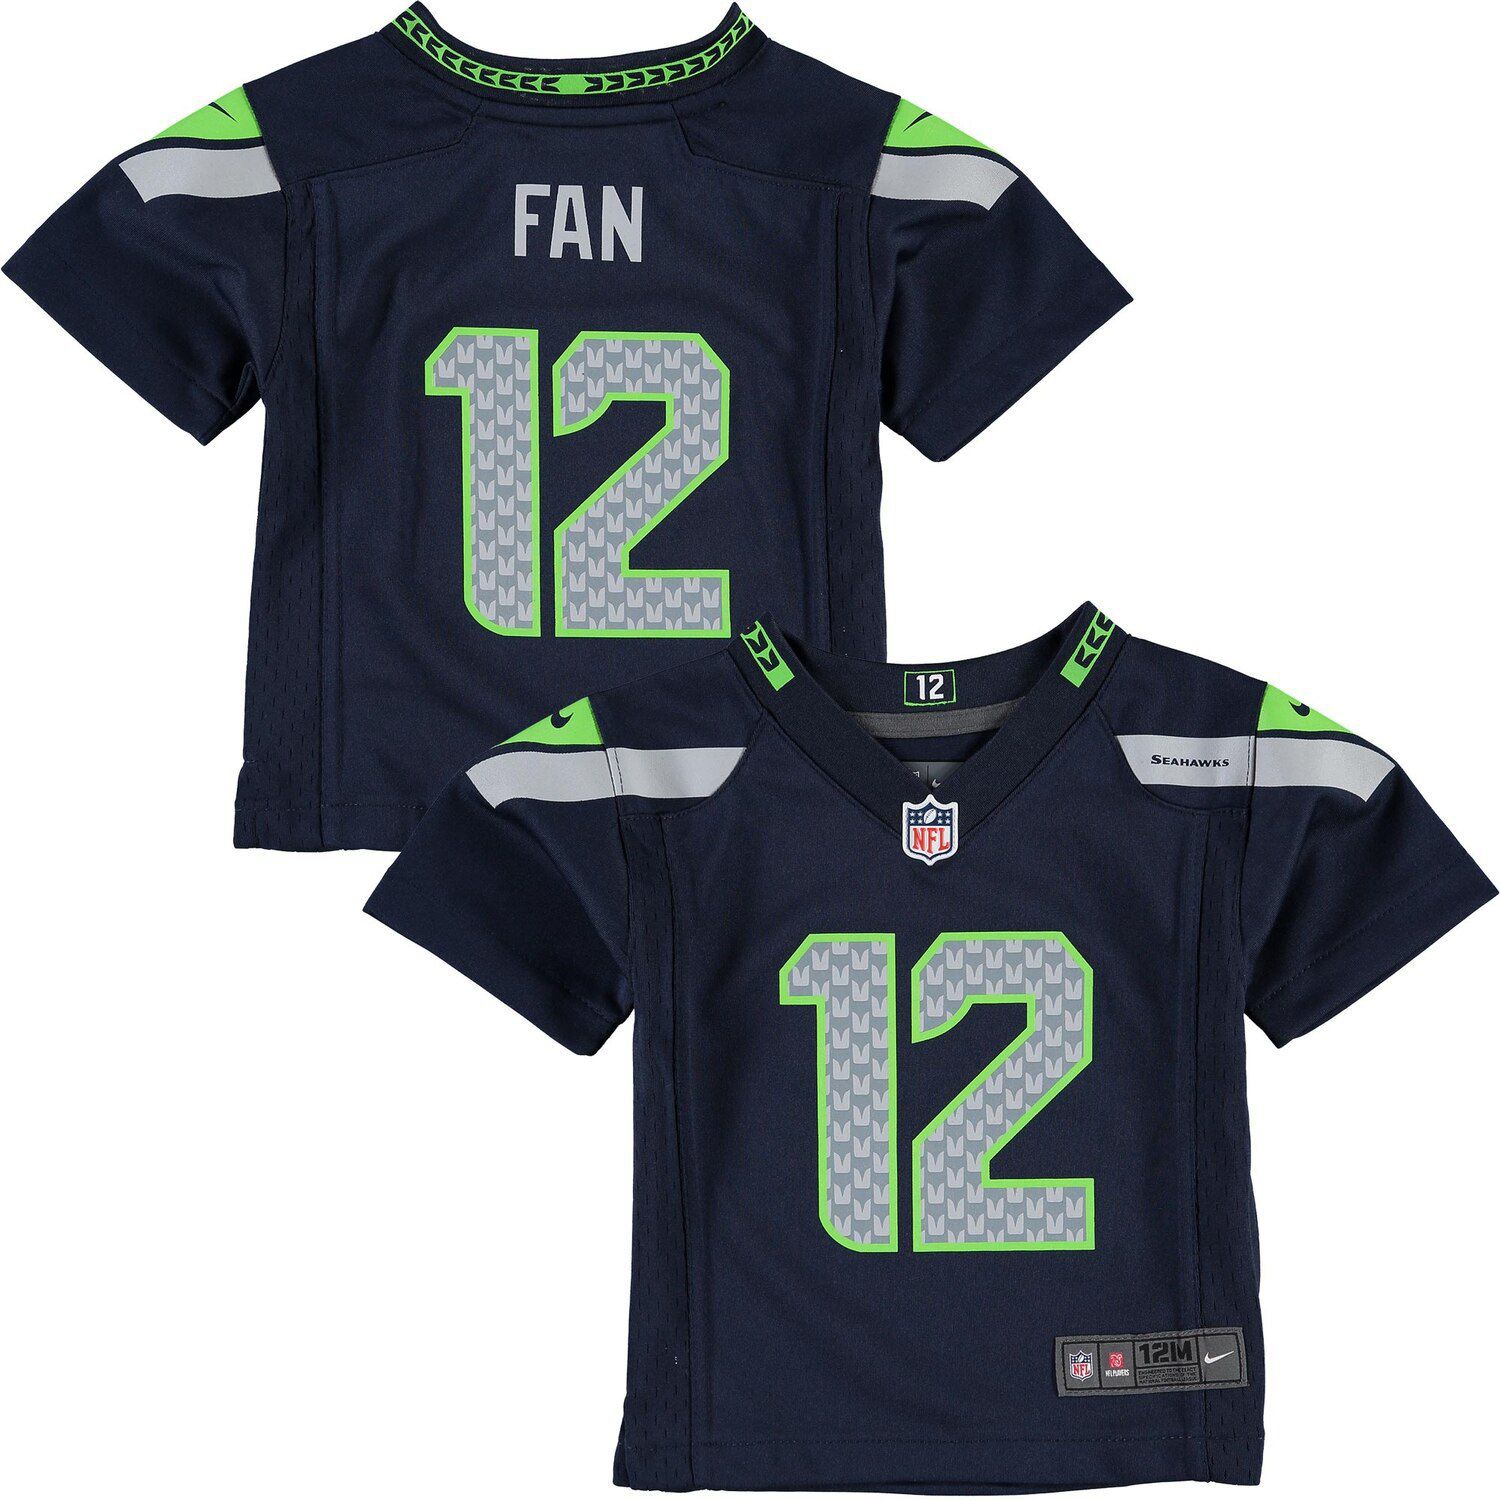 seahawks jersey color today